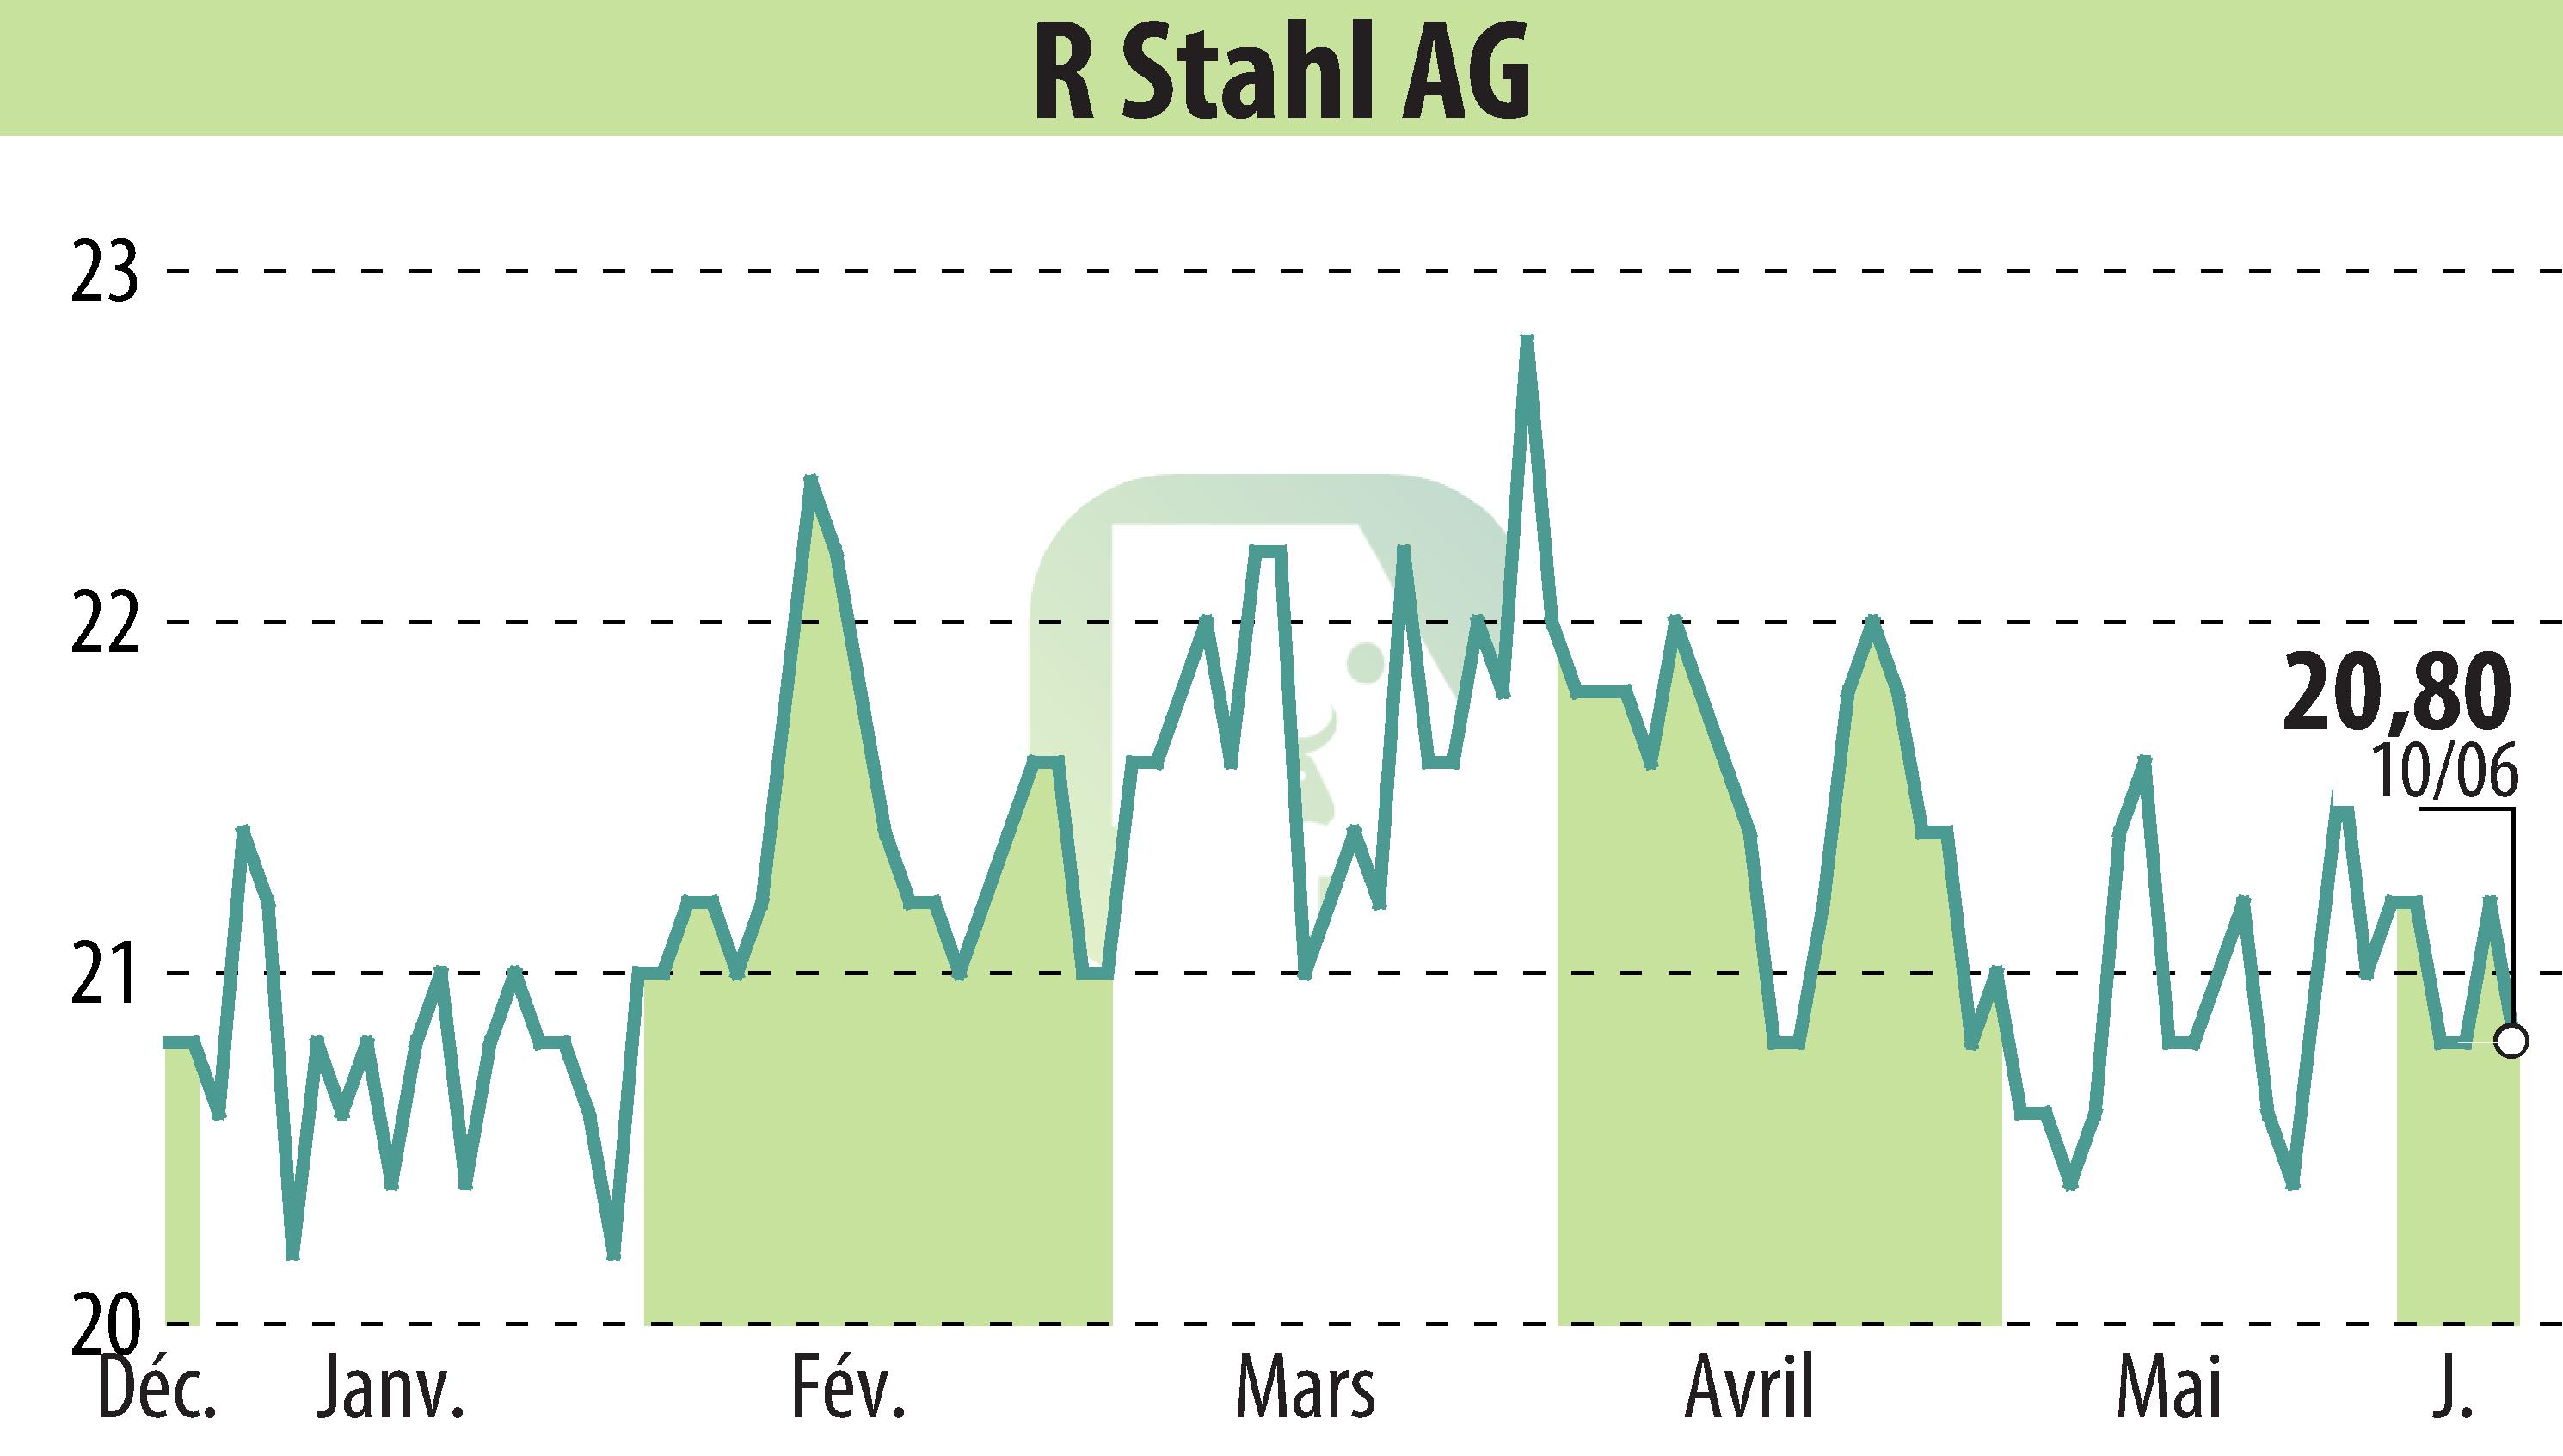 Stock price chart of R. Stahl AG (EBR:RSL2) showing fluctuations.